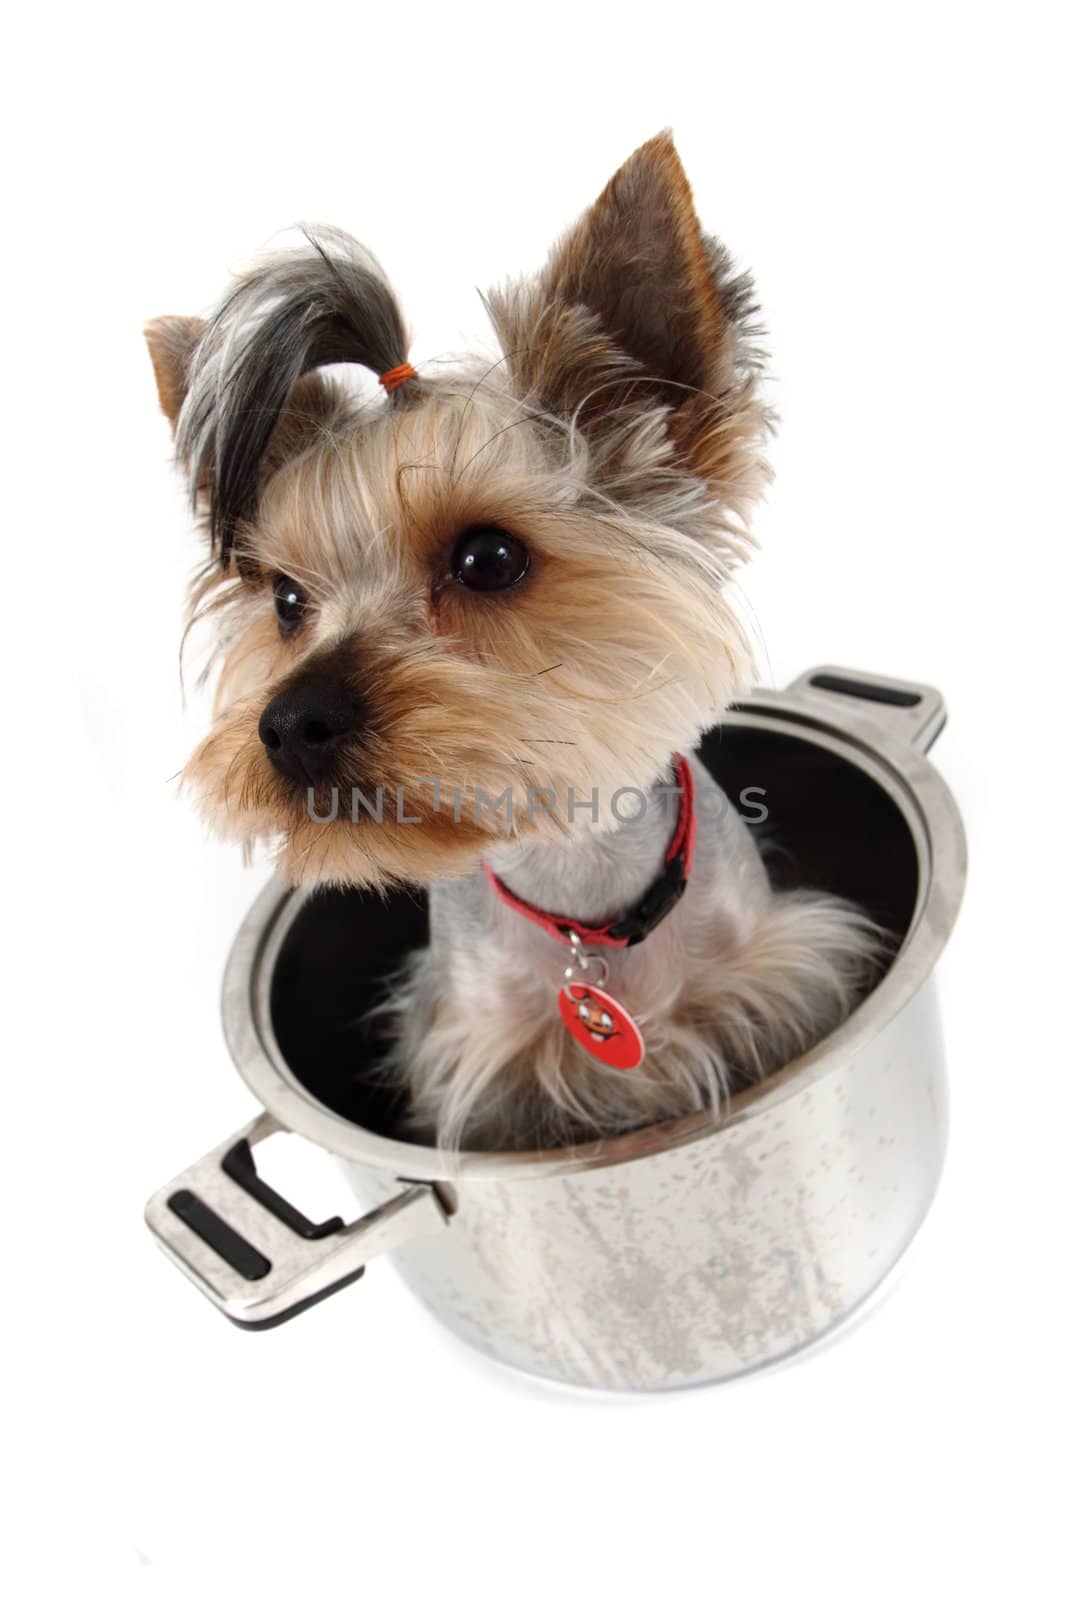 yorkshire terrier in the pot isolated on the white background